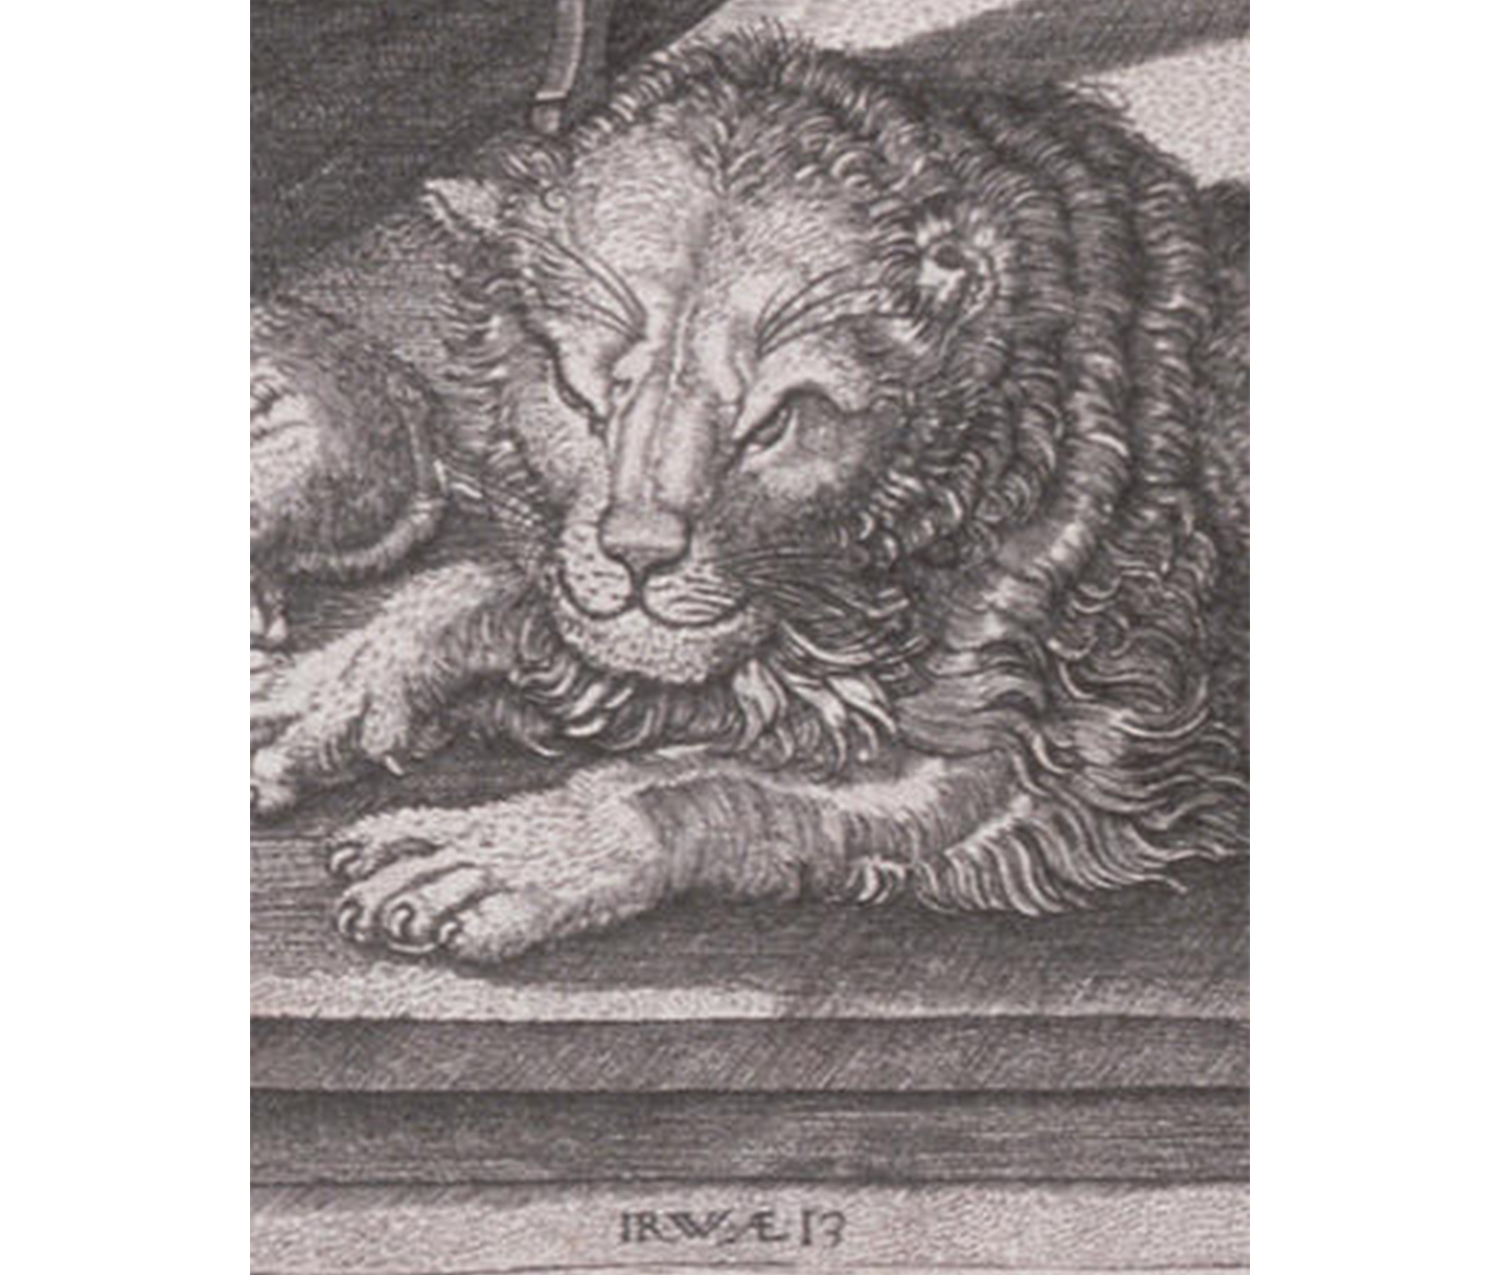 close-up of a lion lounging on the ground. small artist's signature along the bottom fo the image